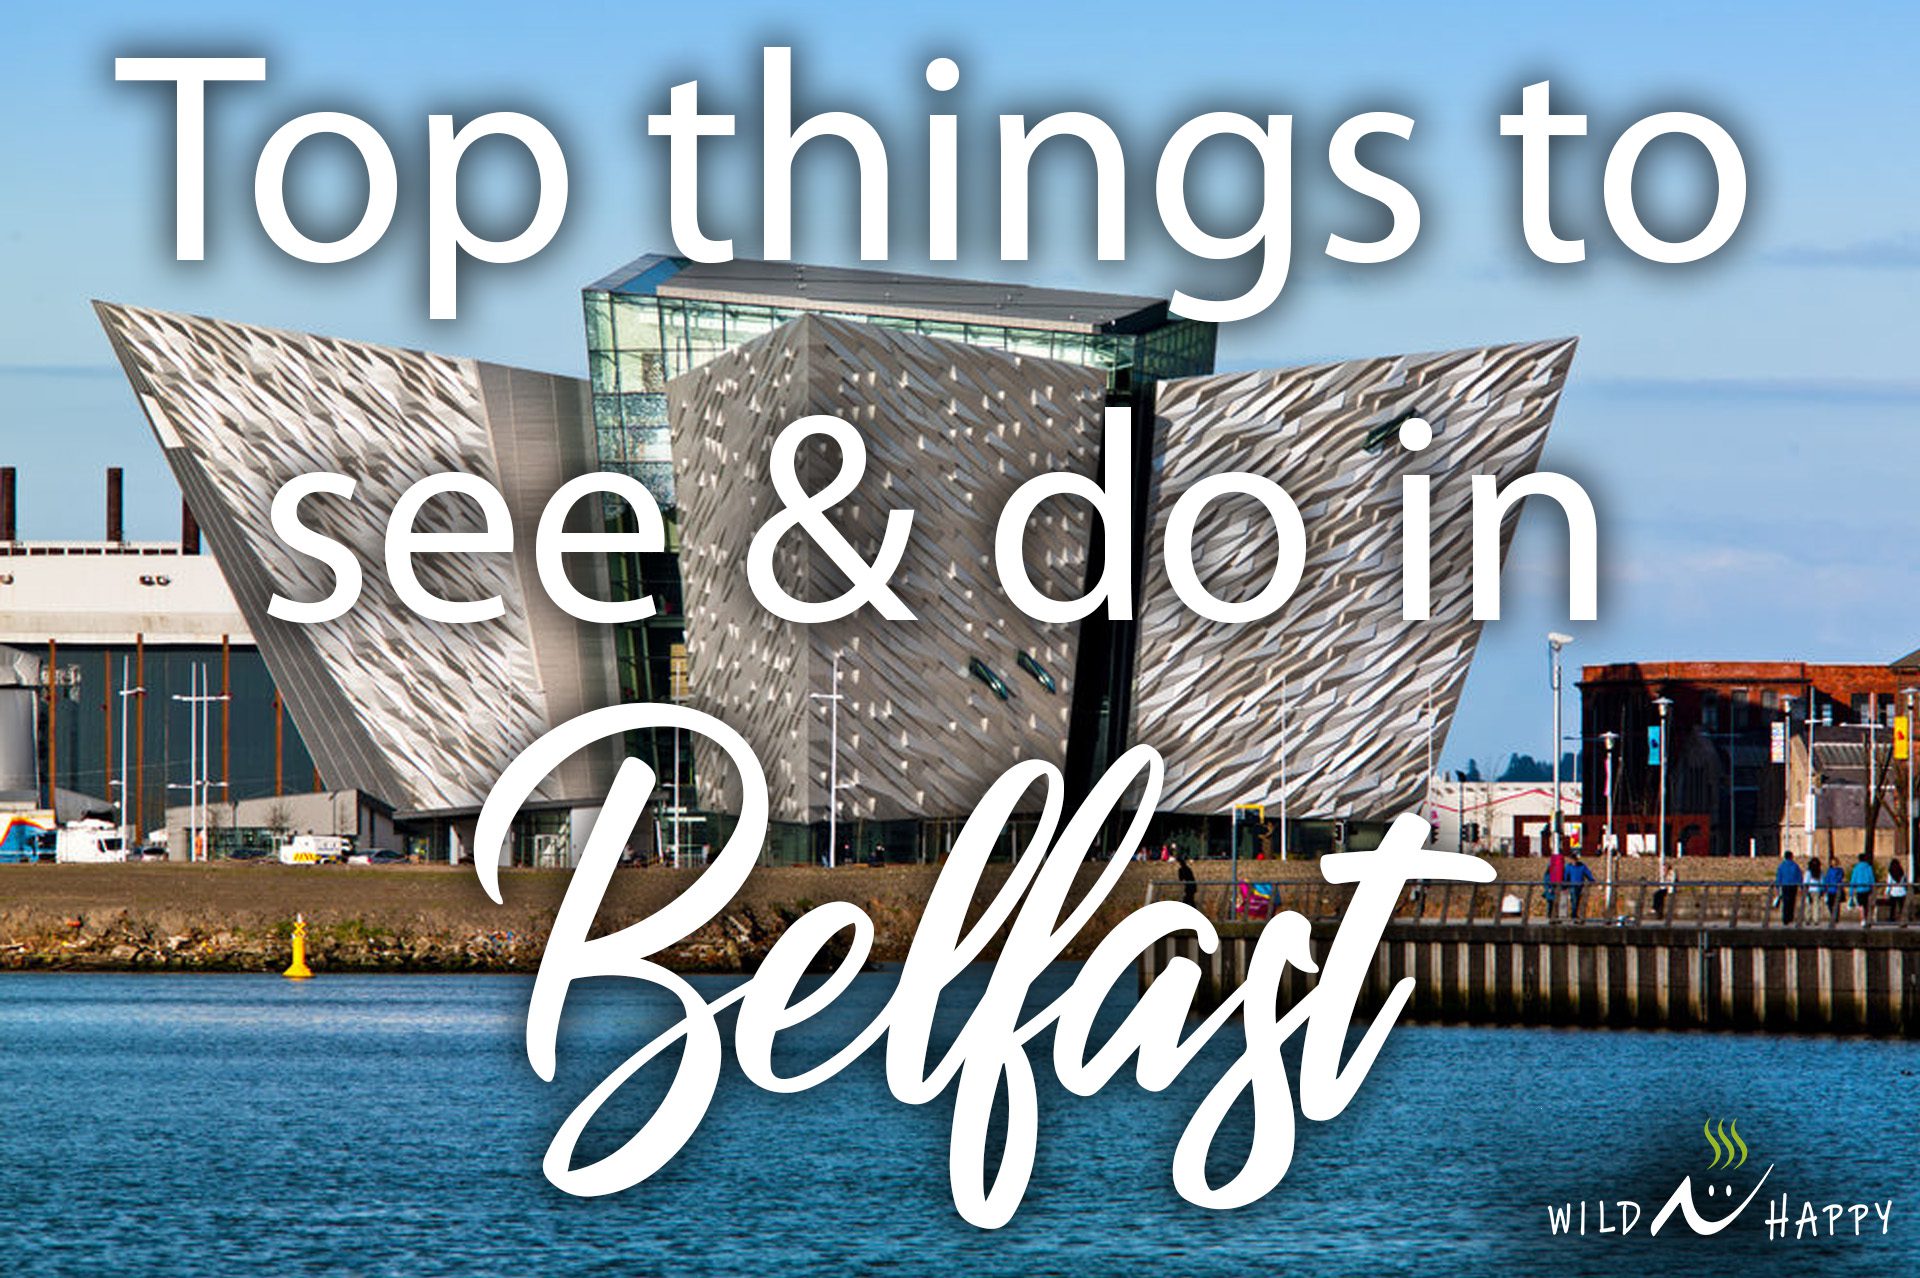 Top things to see & do in Belfast